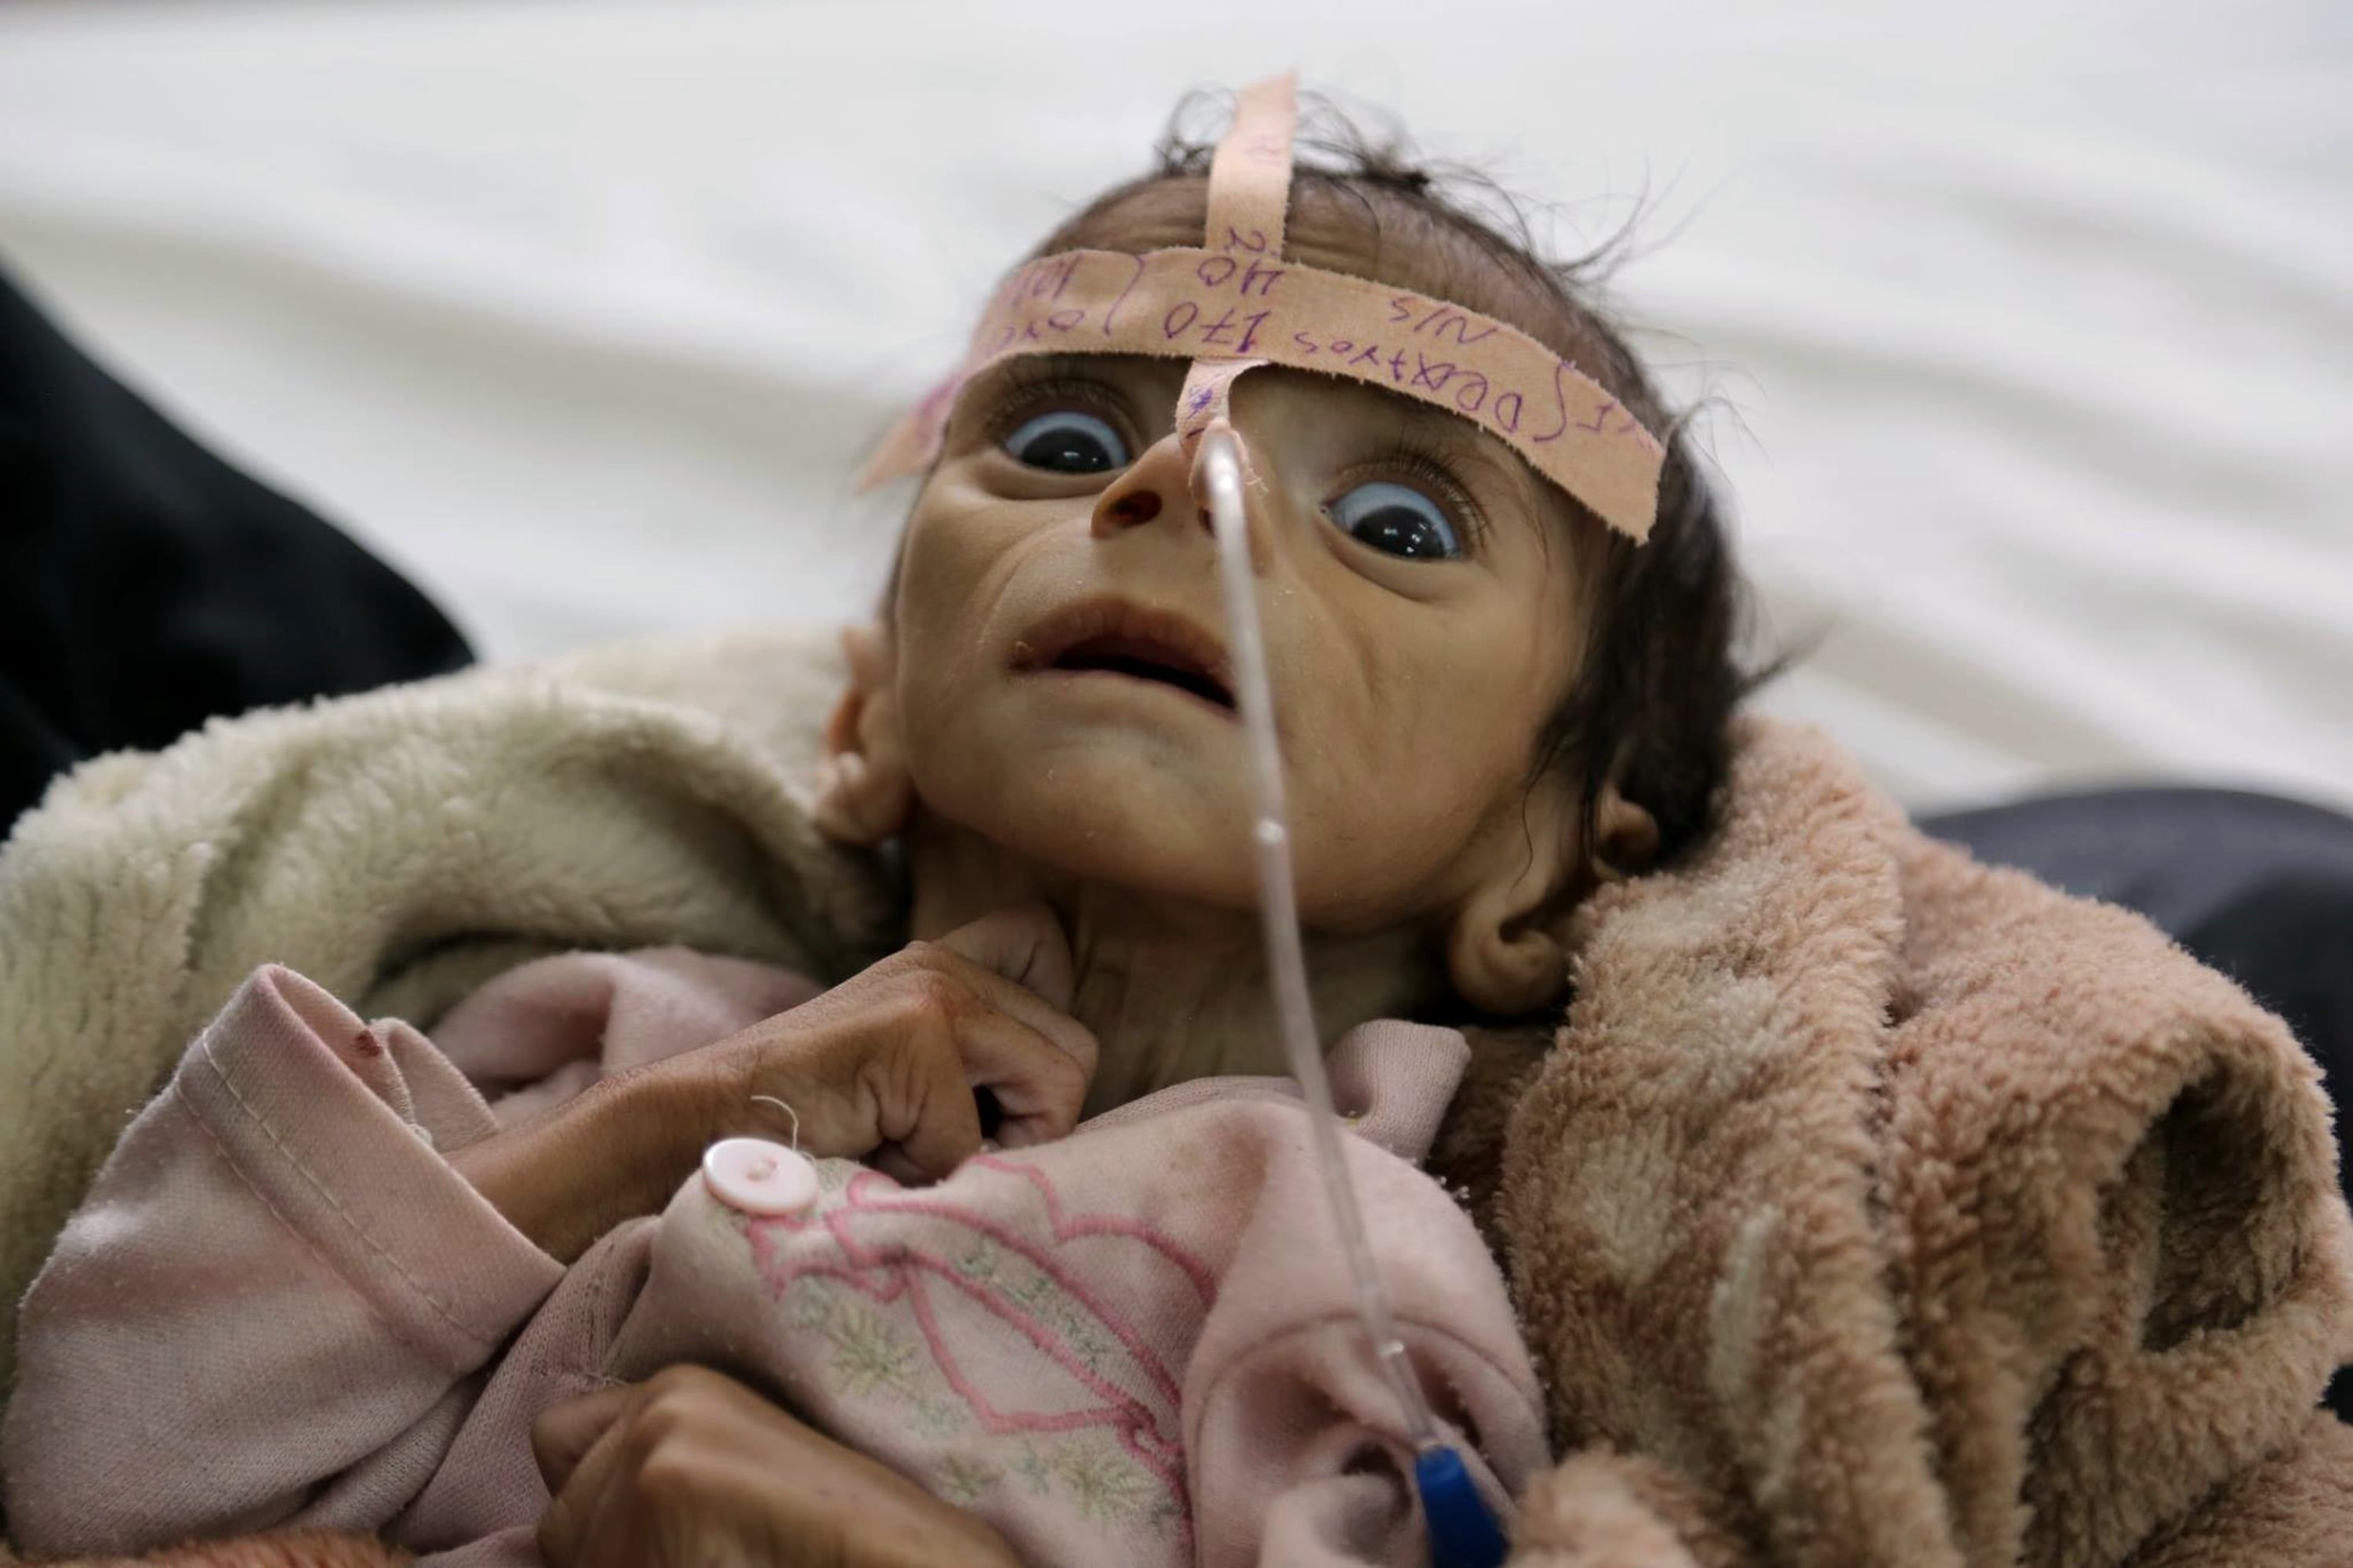 Yemen Hunger War: A man made famine on our watch - Bergensia